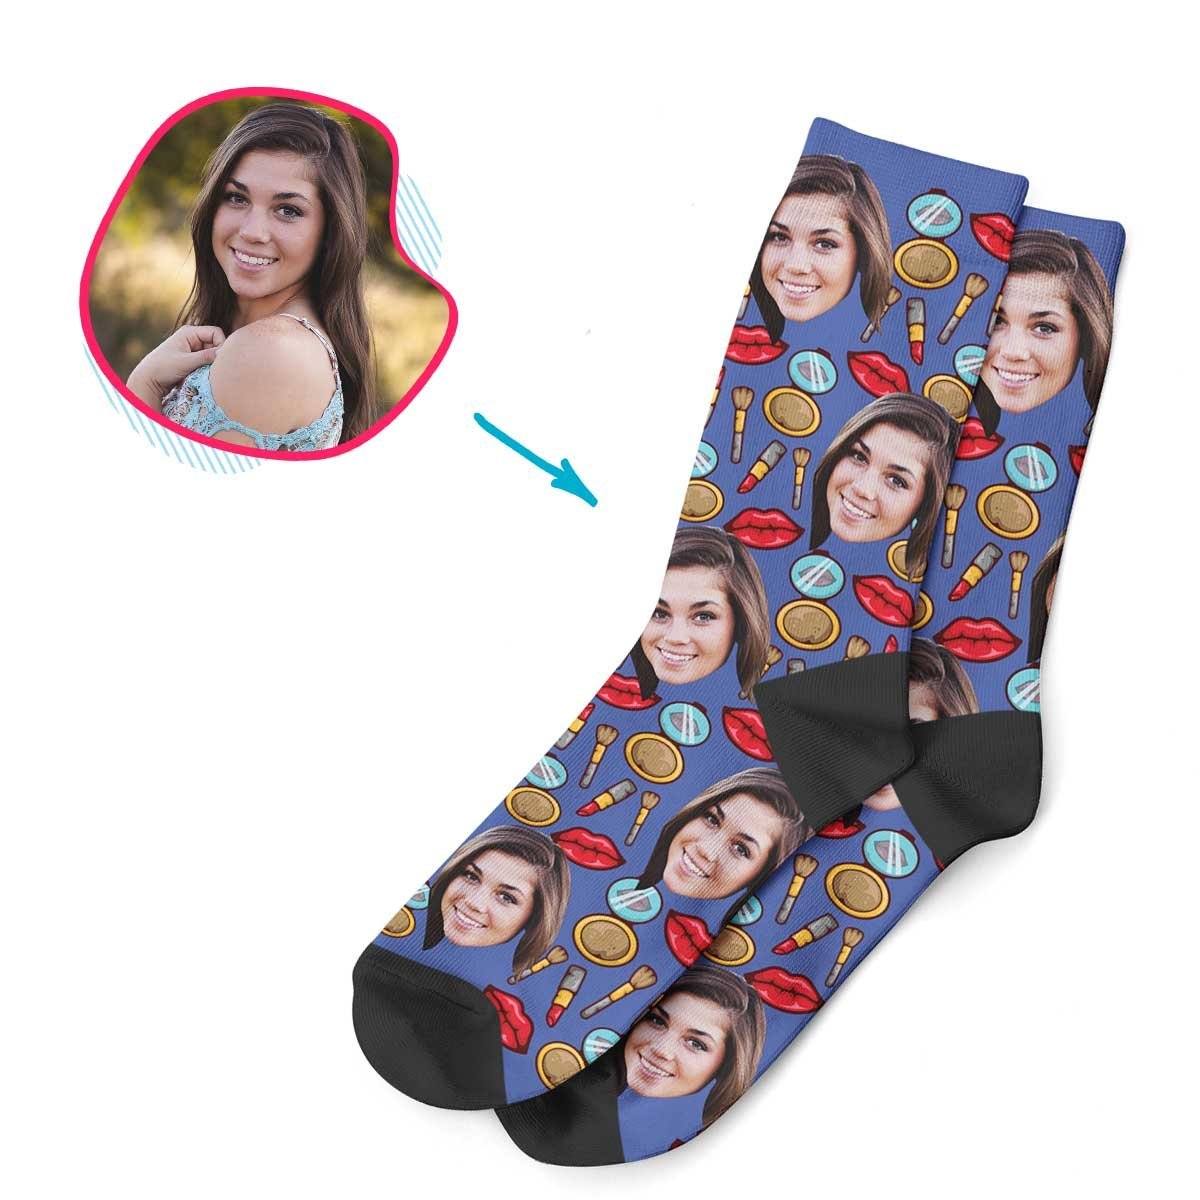 Darkblue Makeup personalized socks with photo of face printed on them